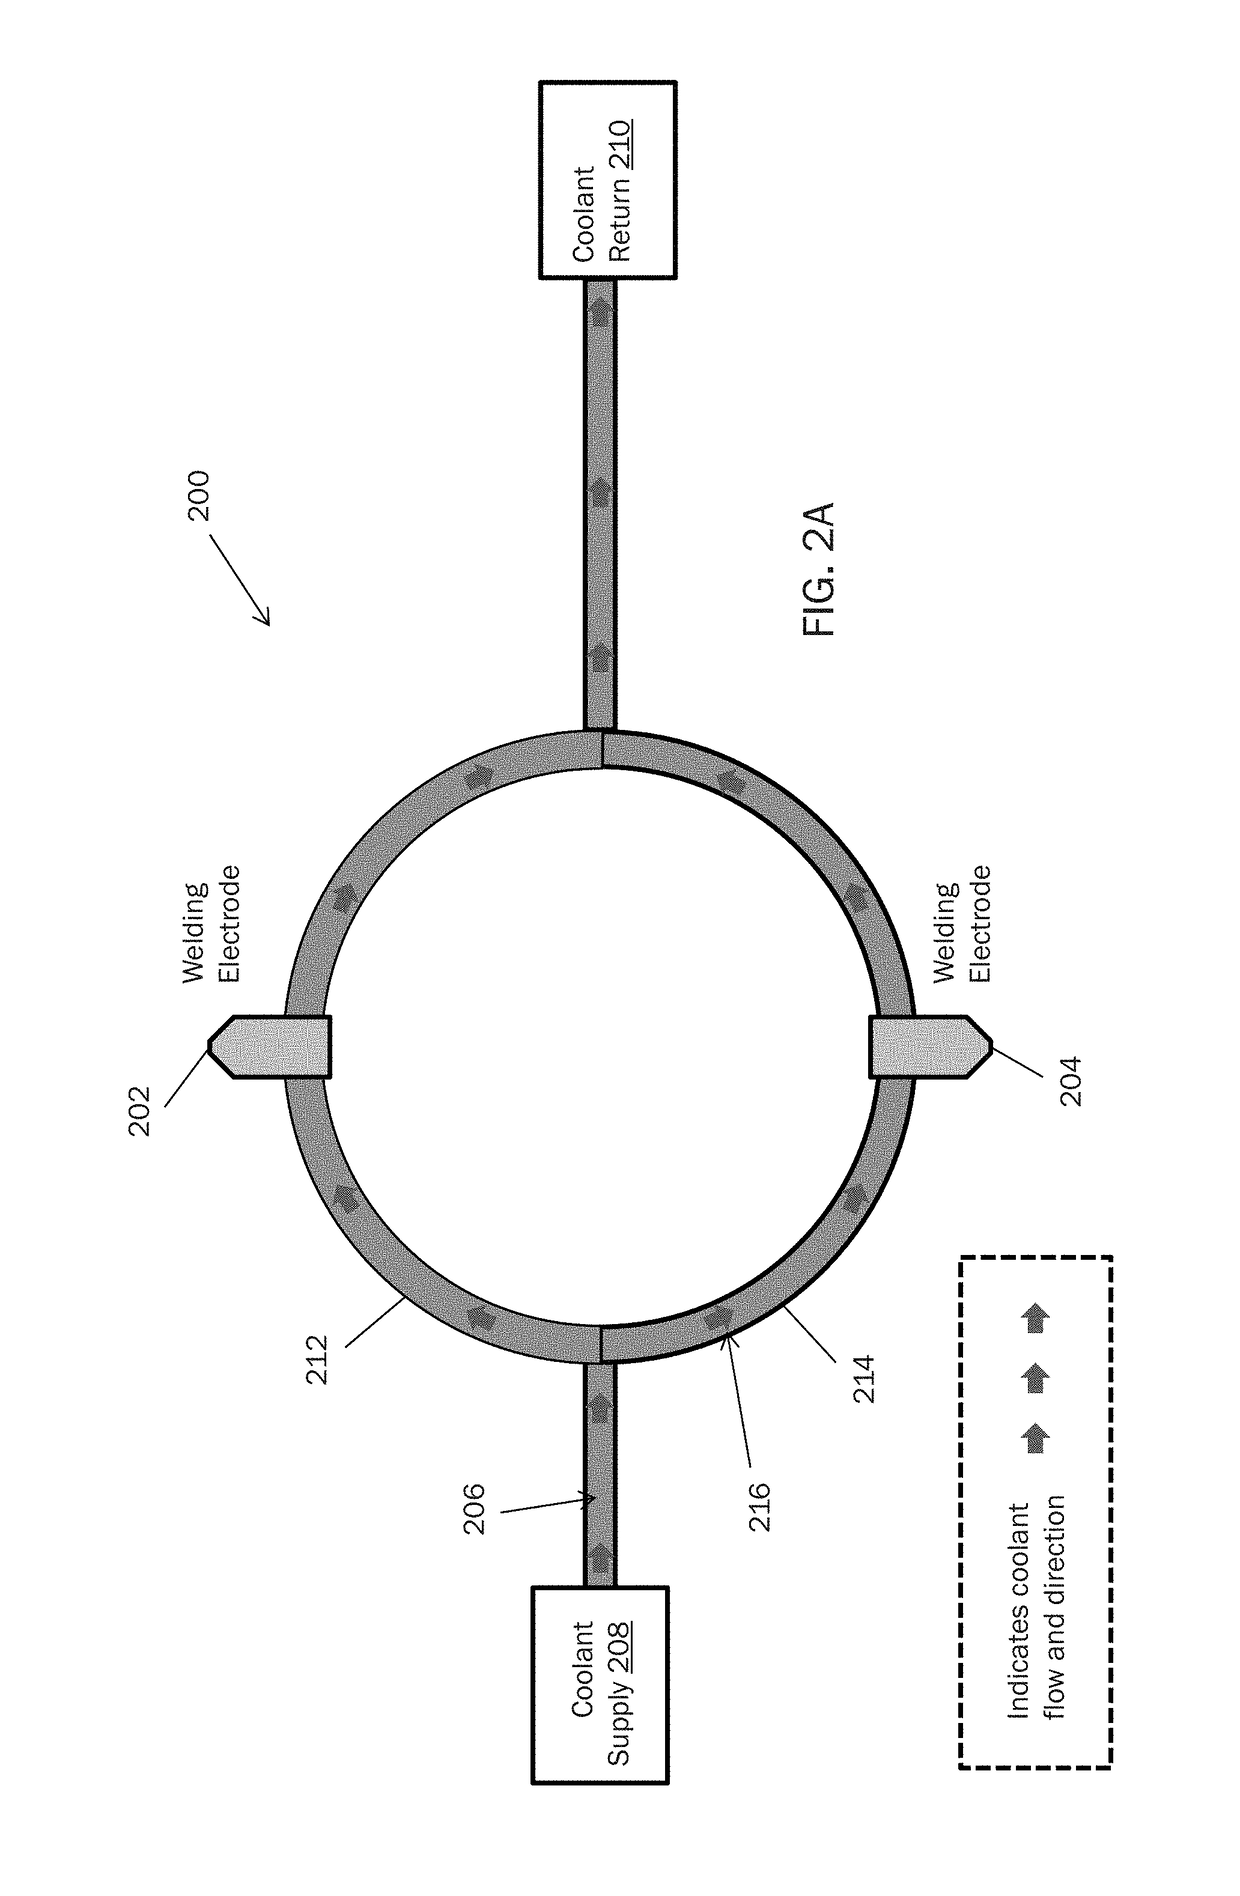 Fluid transfer of suction force between drawback apparatuses